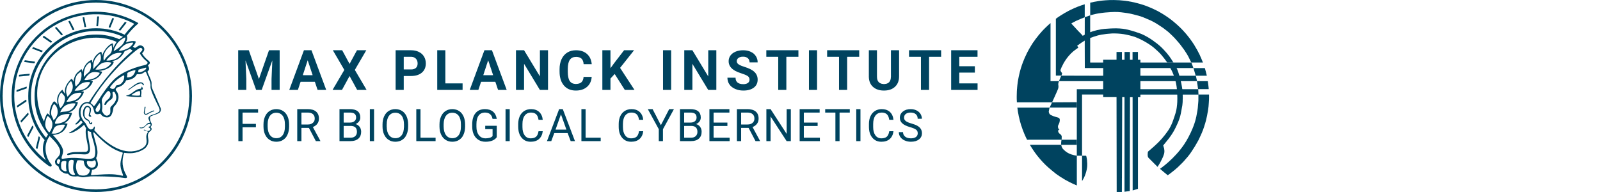 HiWi / Student Assistant or Research Assistant for cognitive task programming in Python - Max Planck Institute for Biological Cybernetics - Logo